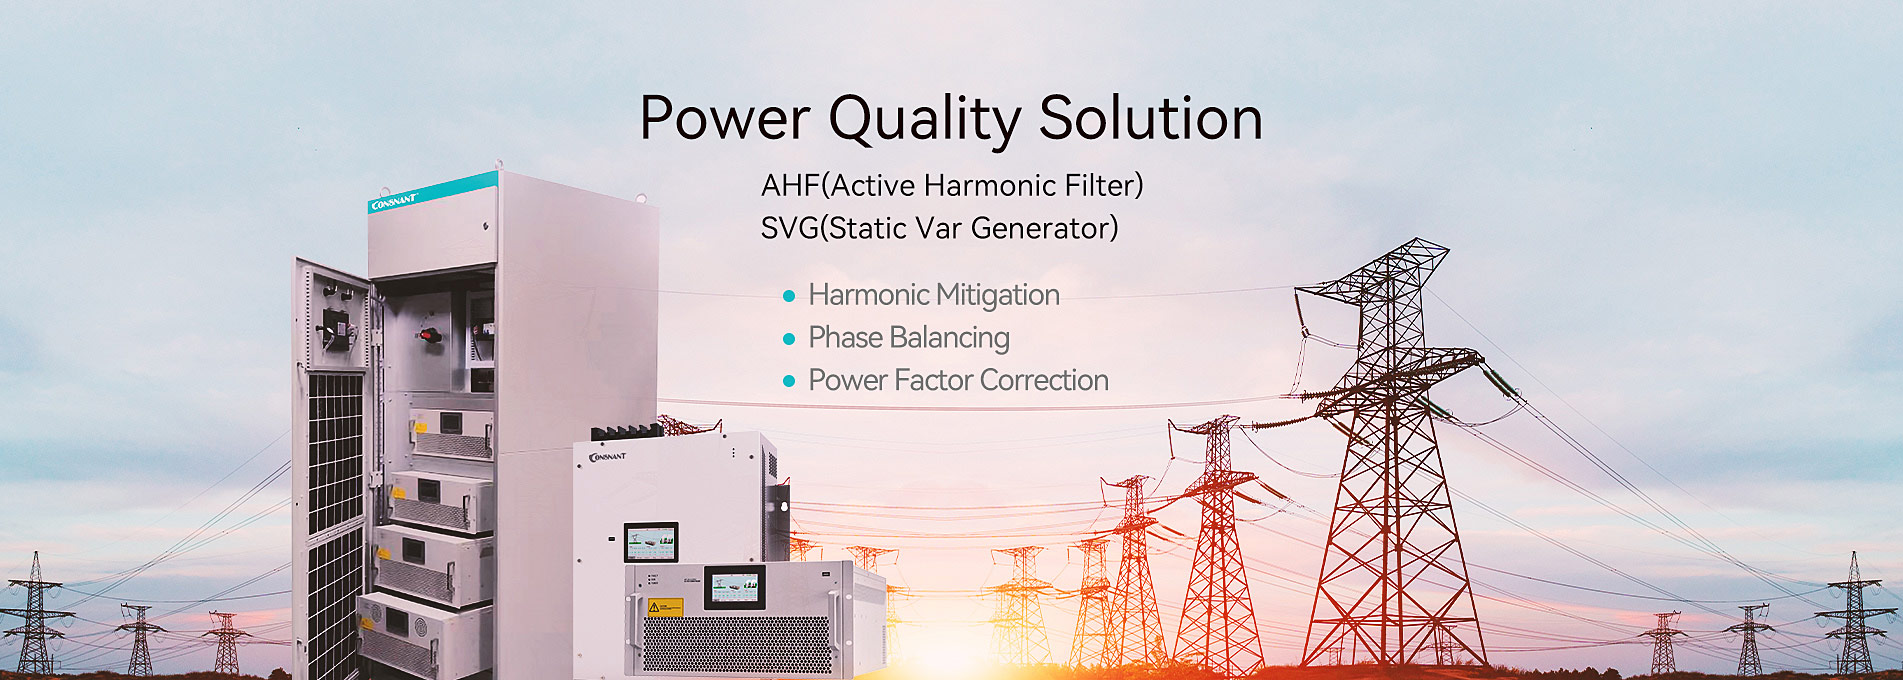 POWER QUALITY SOLUTION